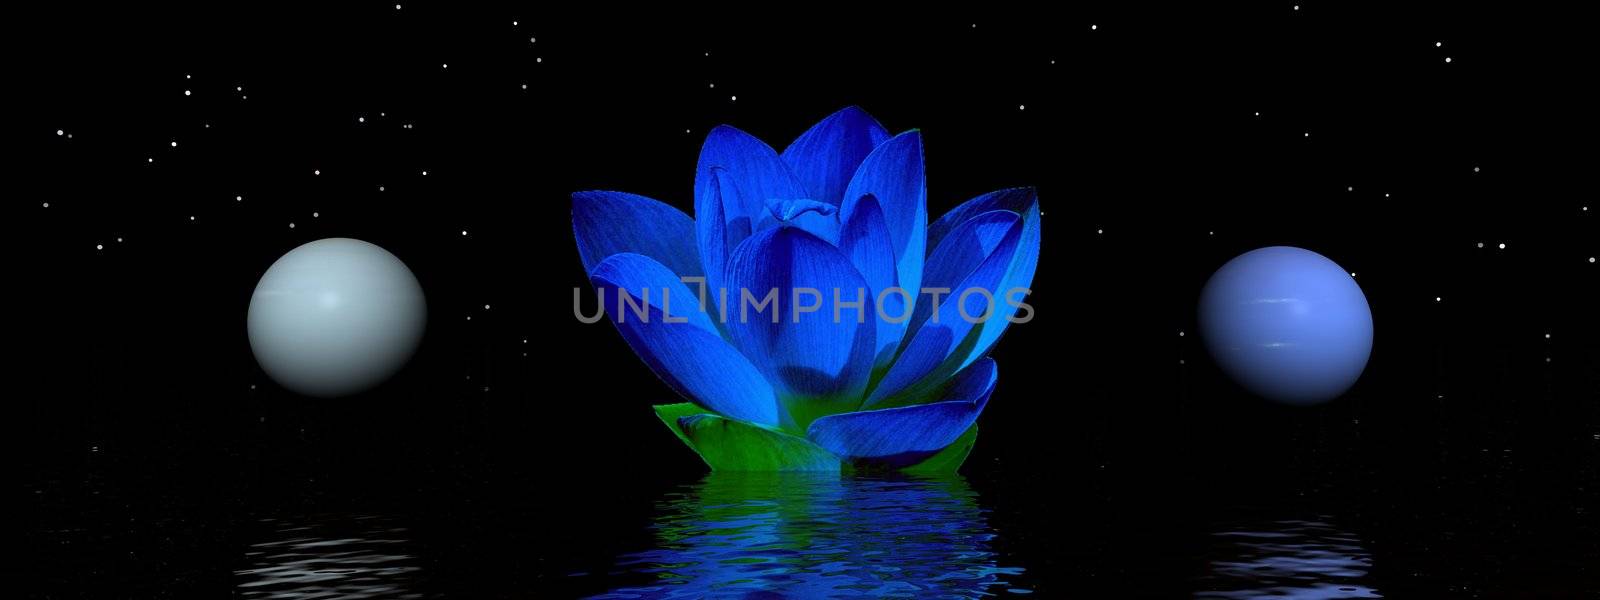 water lily and planets by mariephotos